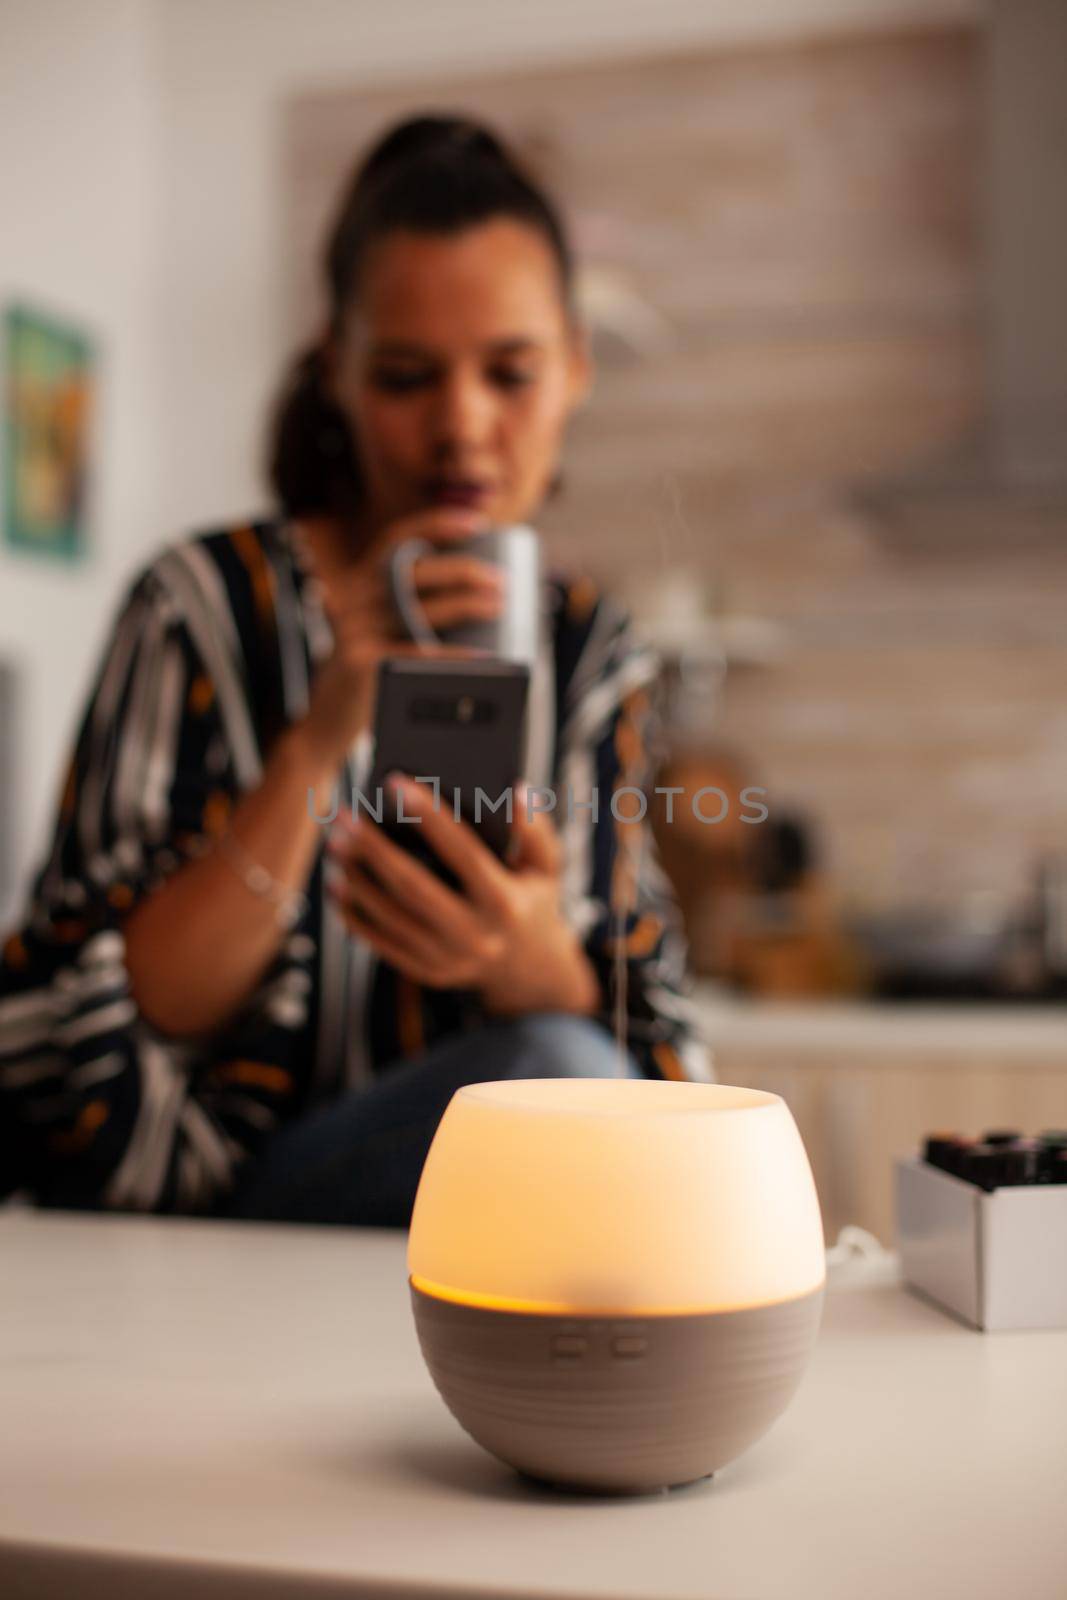 Woman browsing on phone enjoying aromatherapy from essential oil diffuser. Aroma health essence, welness aromatherapy home spa fragrance tranquil theraphy, therapeutic steam, mental health treatment